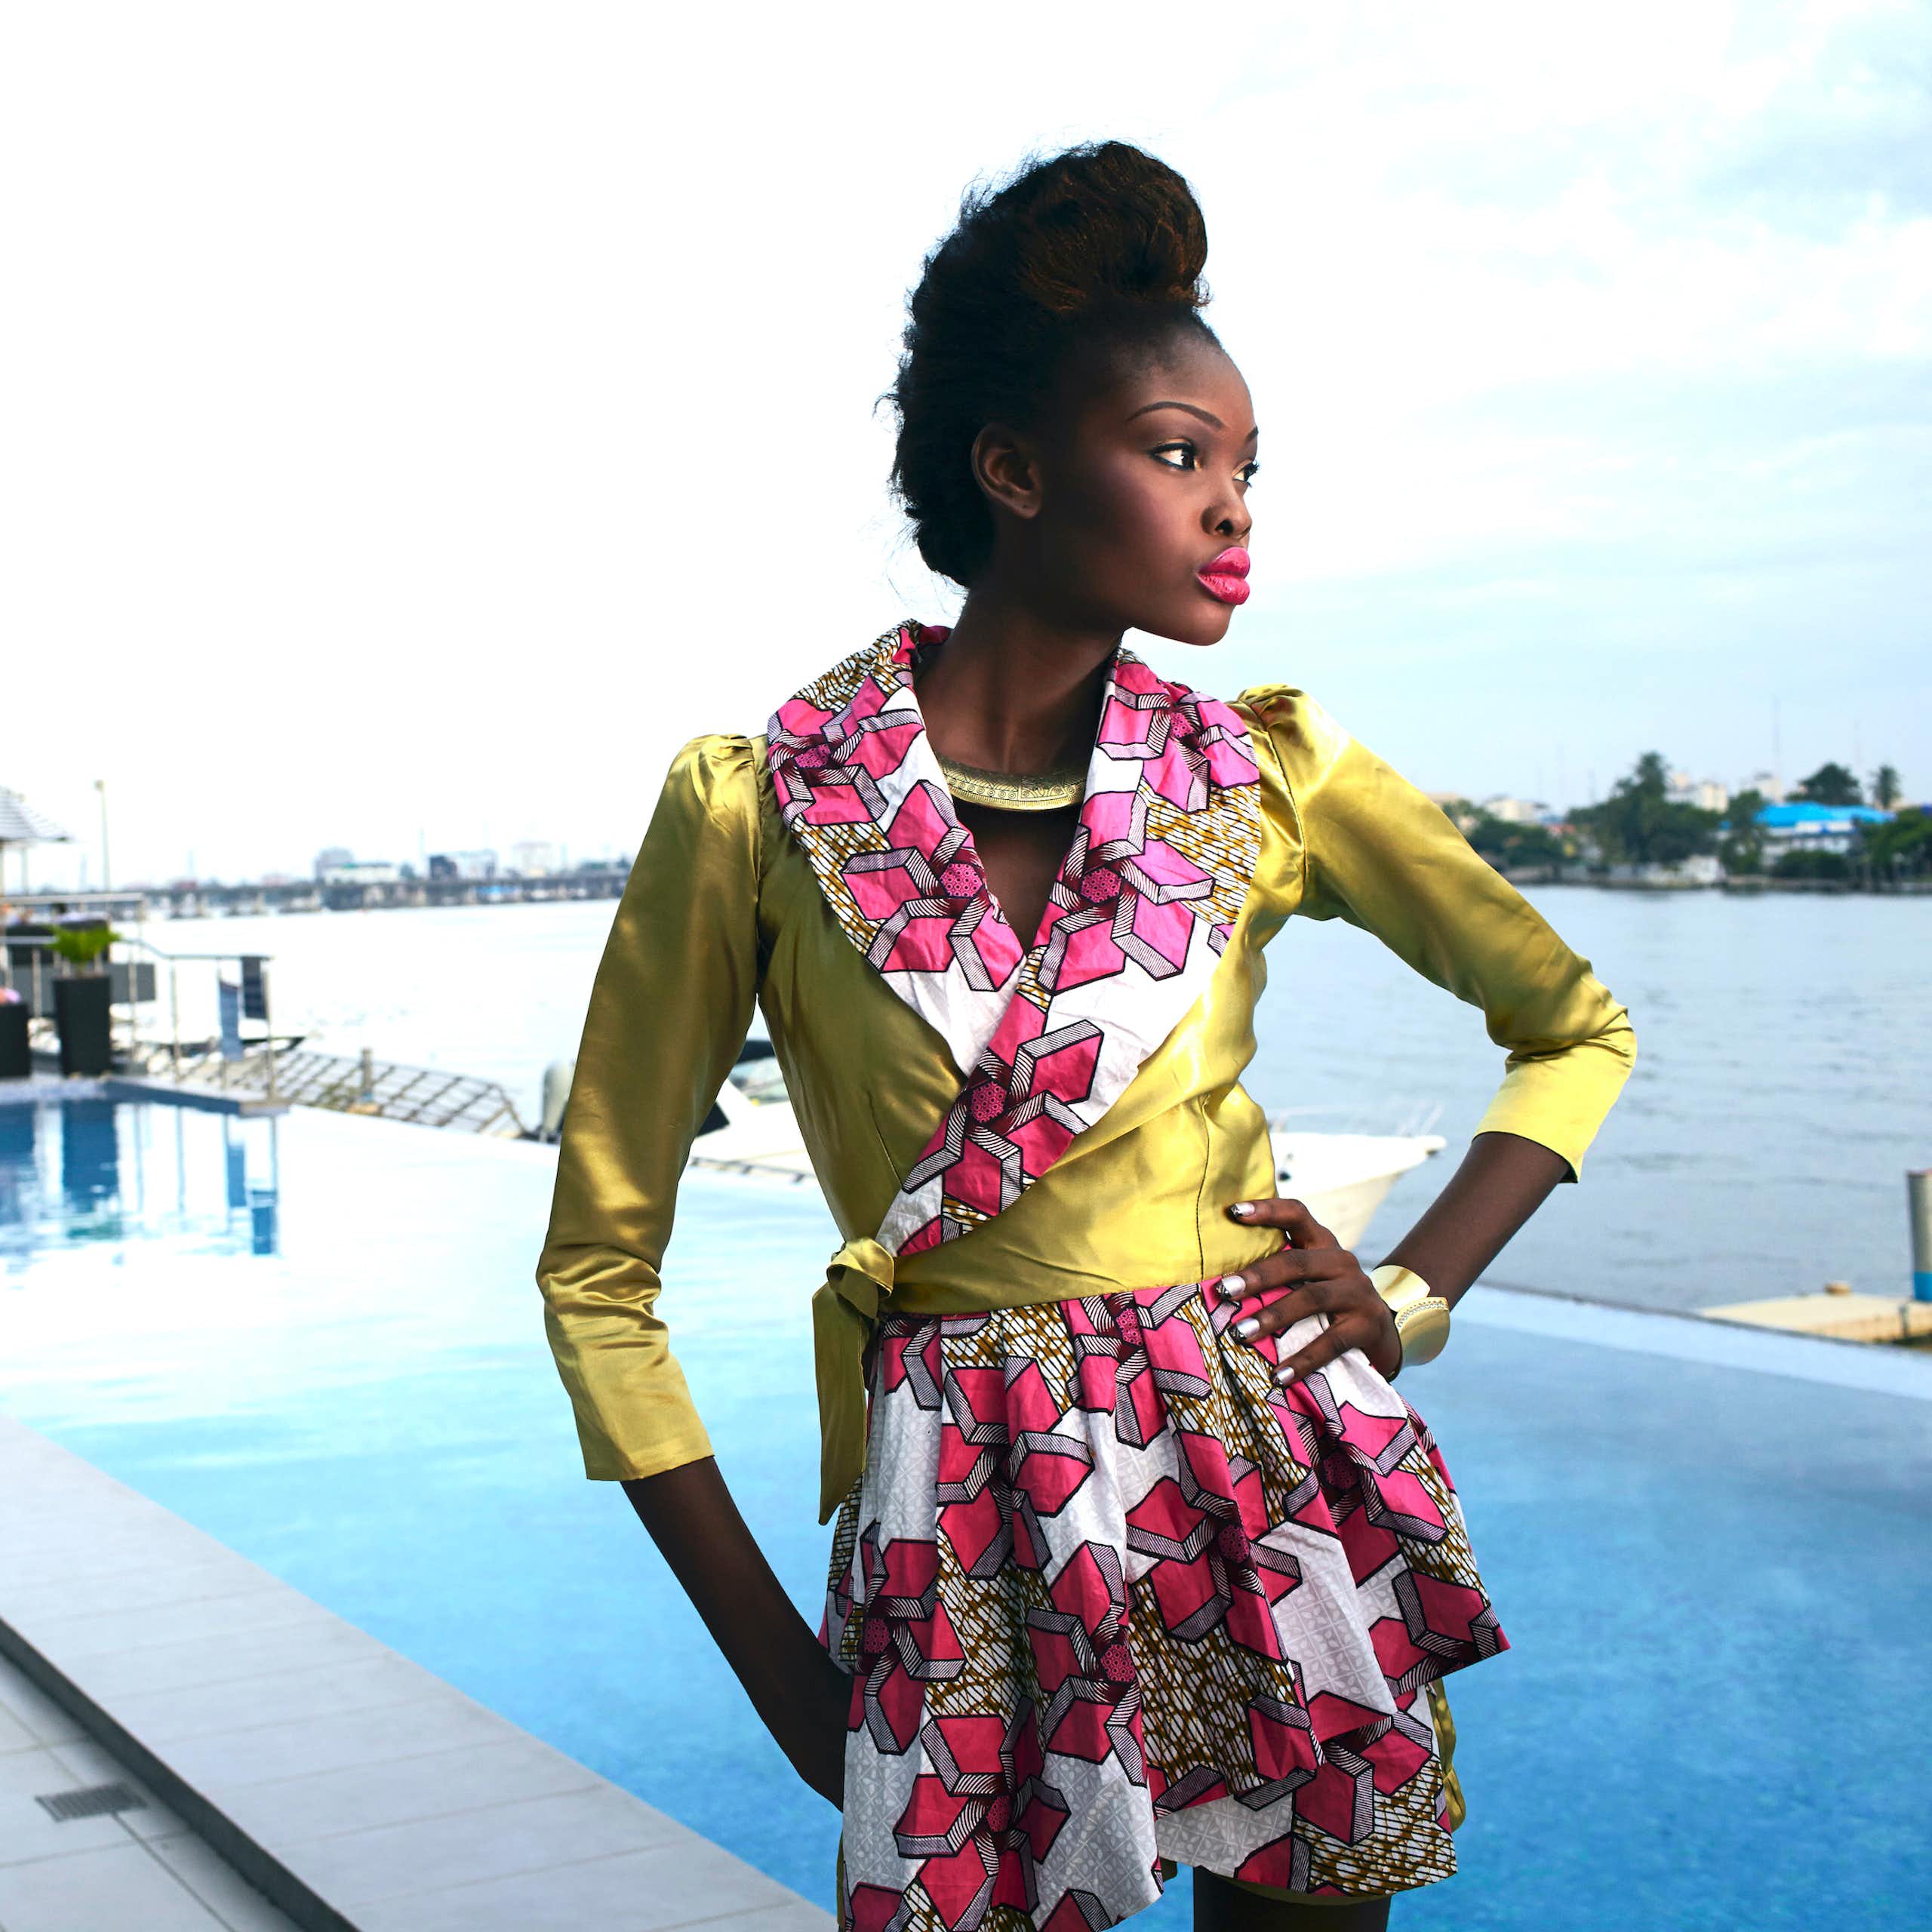  A young woman stands at a waterfront pool with an arm on her hip, posing in an outfit of shiny green with pink African fabric contrasting it on the collar and skirt. 